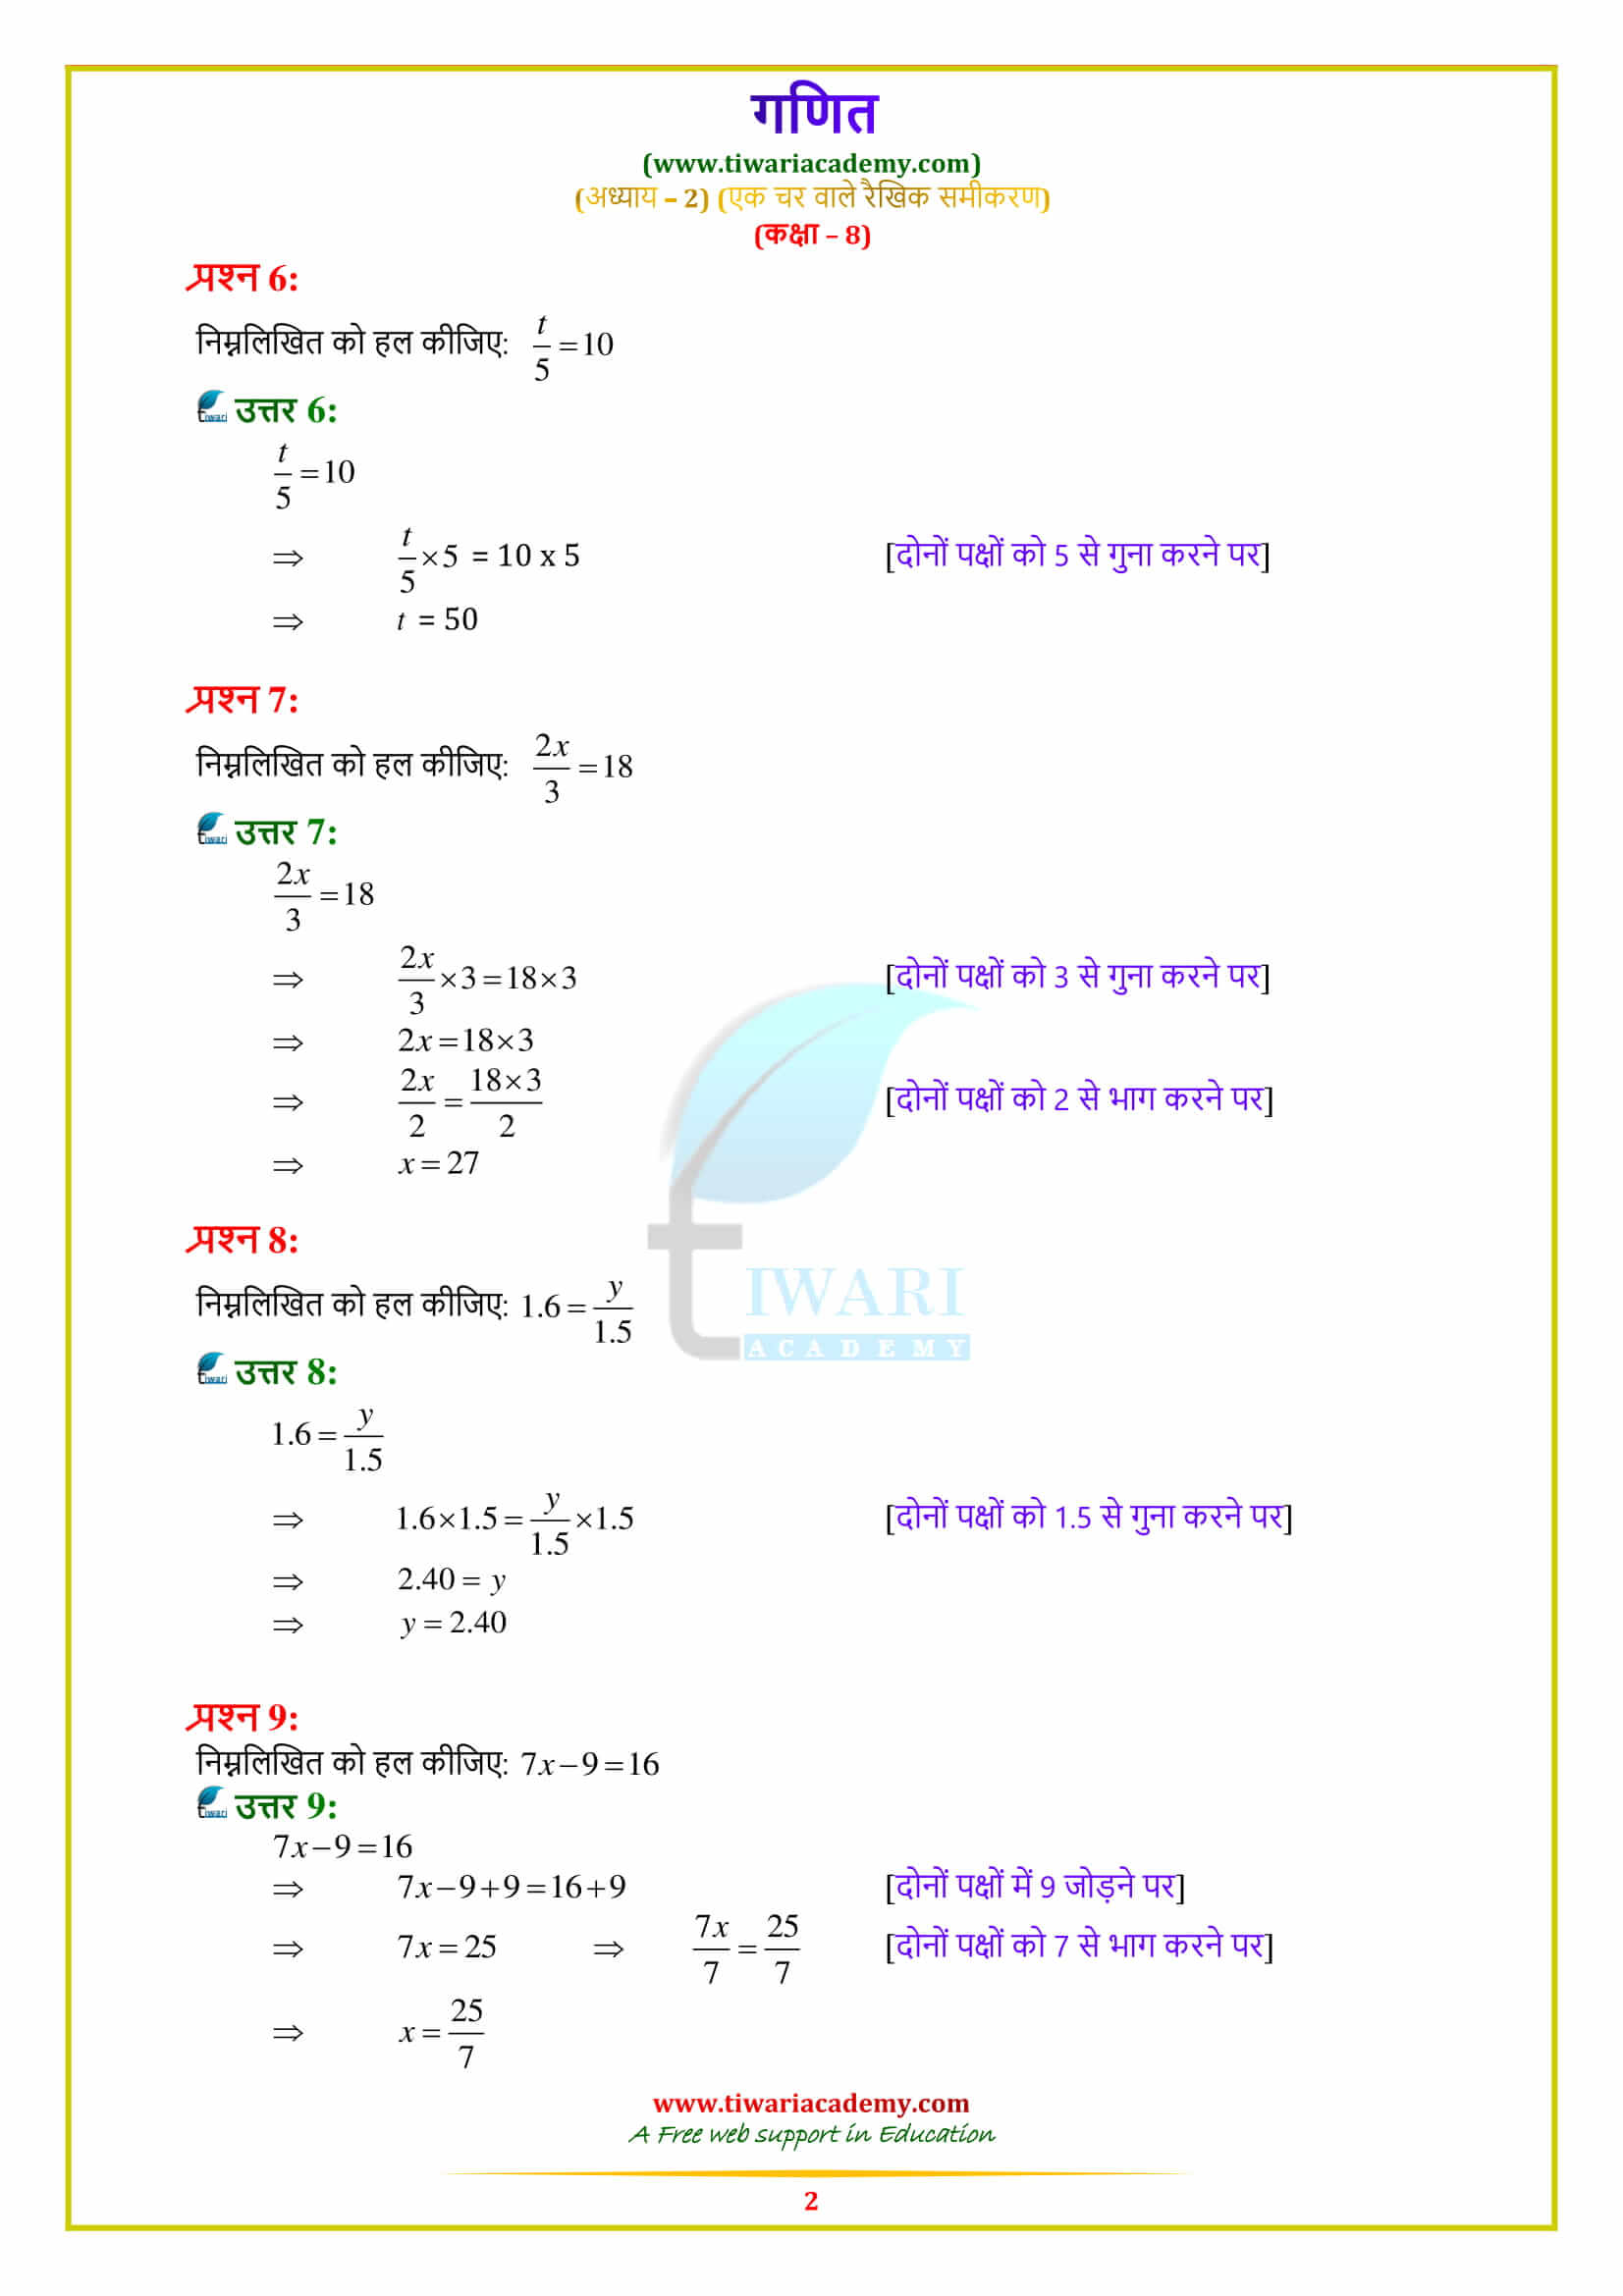 NCERT Solutions for Class 8 Maths Chapter 2 Exercise 2.1 free download